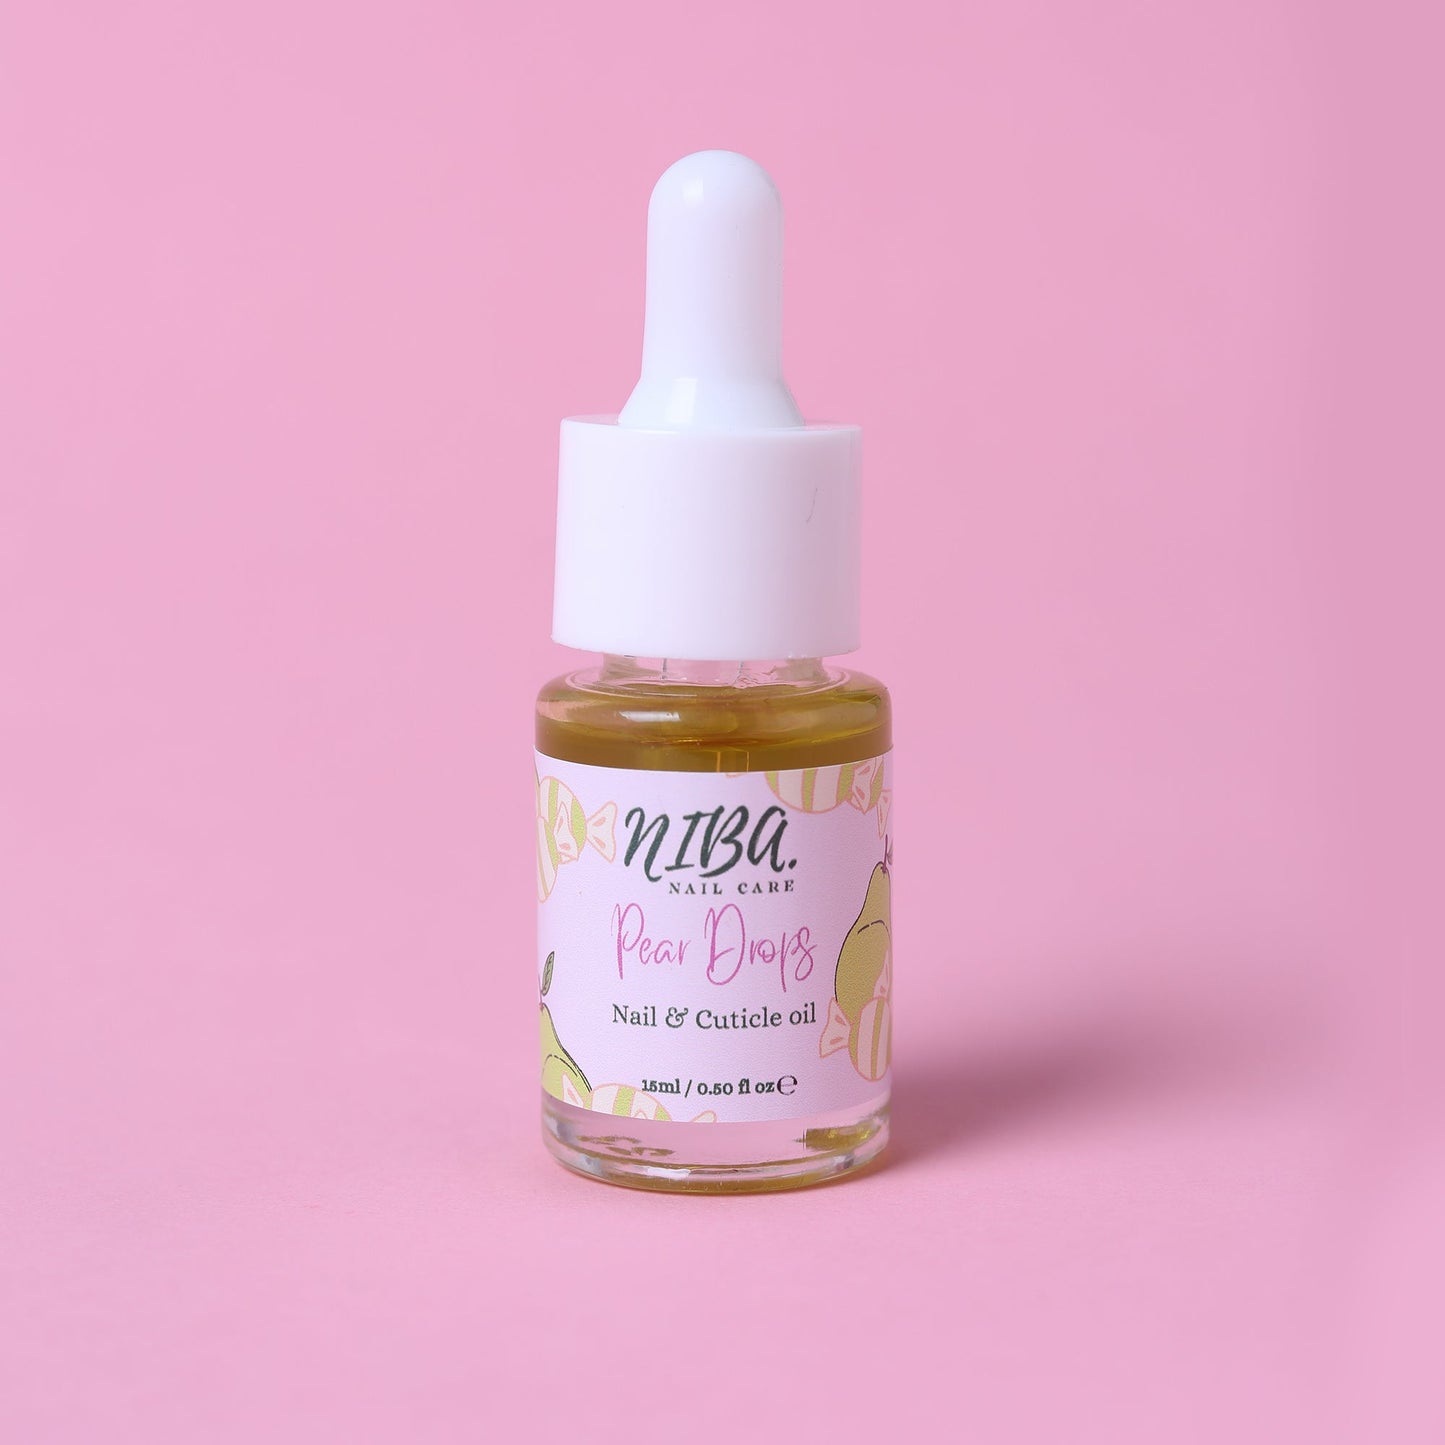 NIBA X Nail & Cuticle oil 15ml Dropper bottle - Our Products, Your Branding! (Trade)